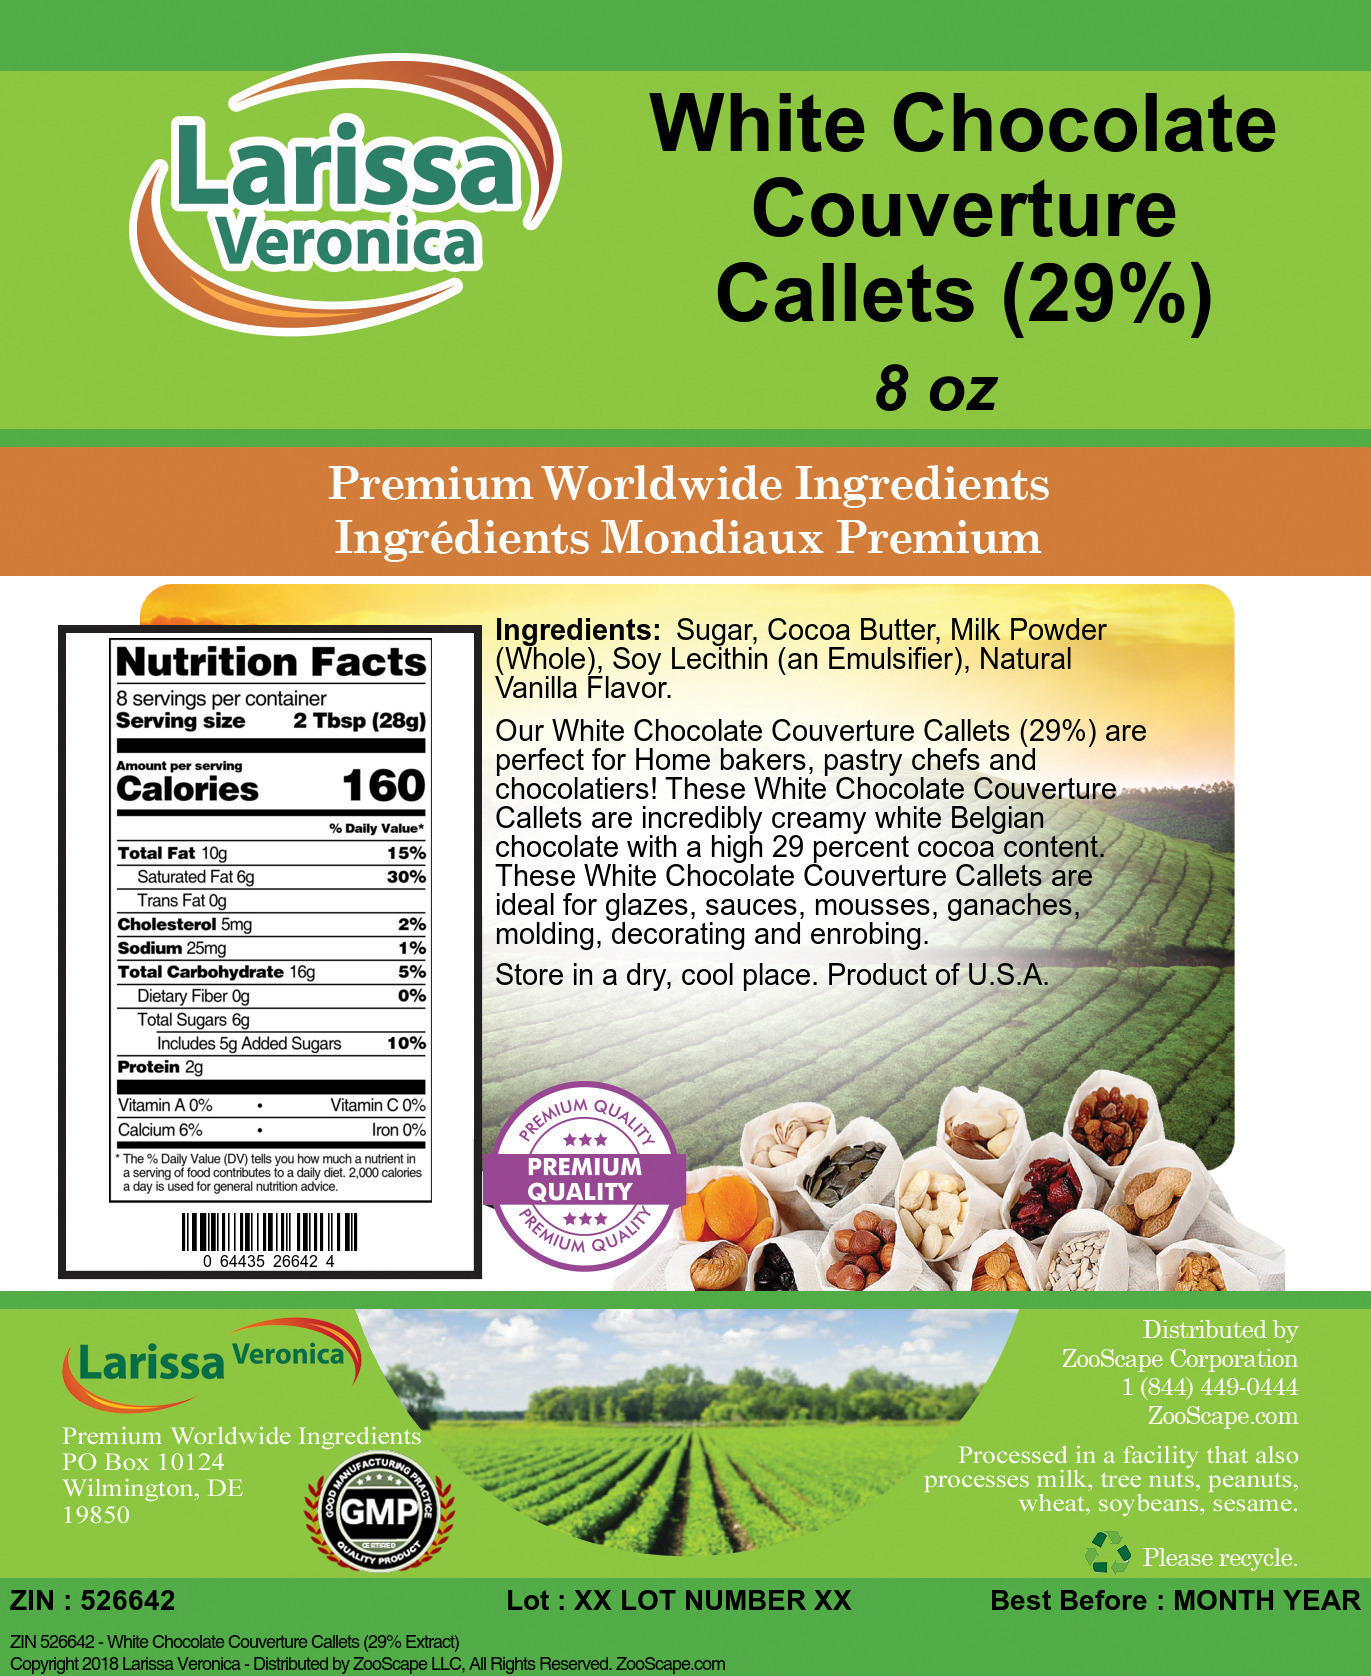 White Chocolate Couverture Callets (29%) - Label